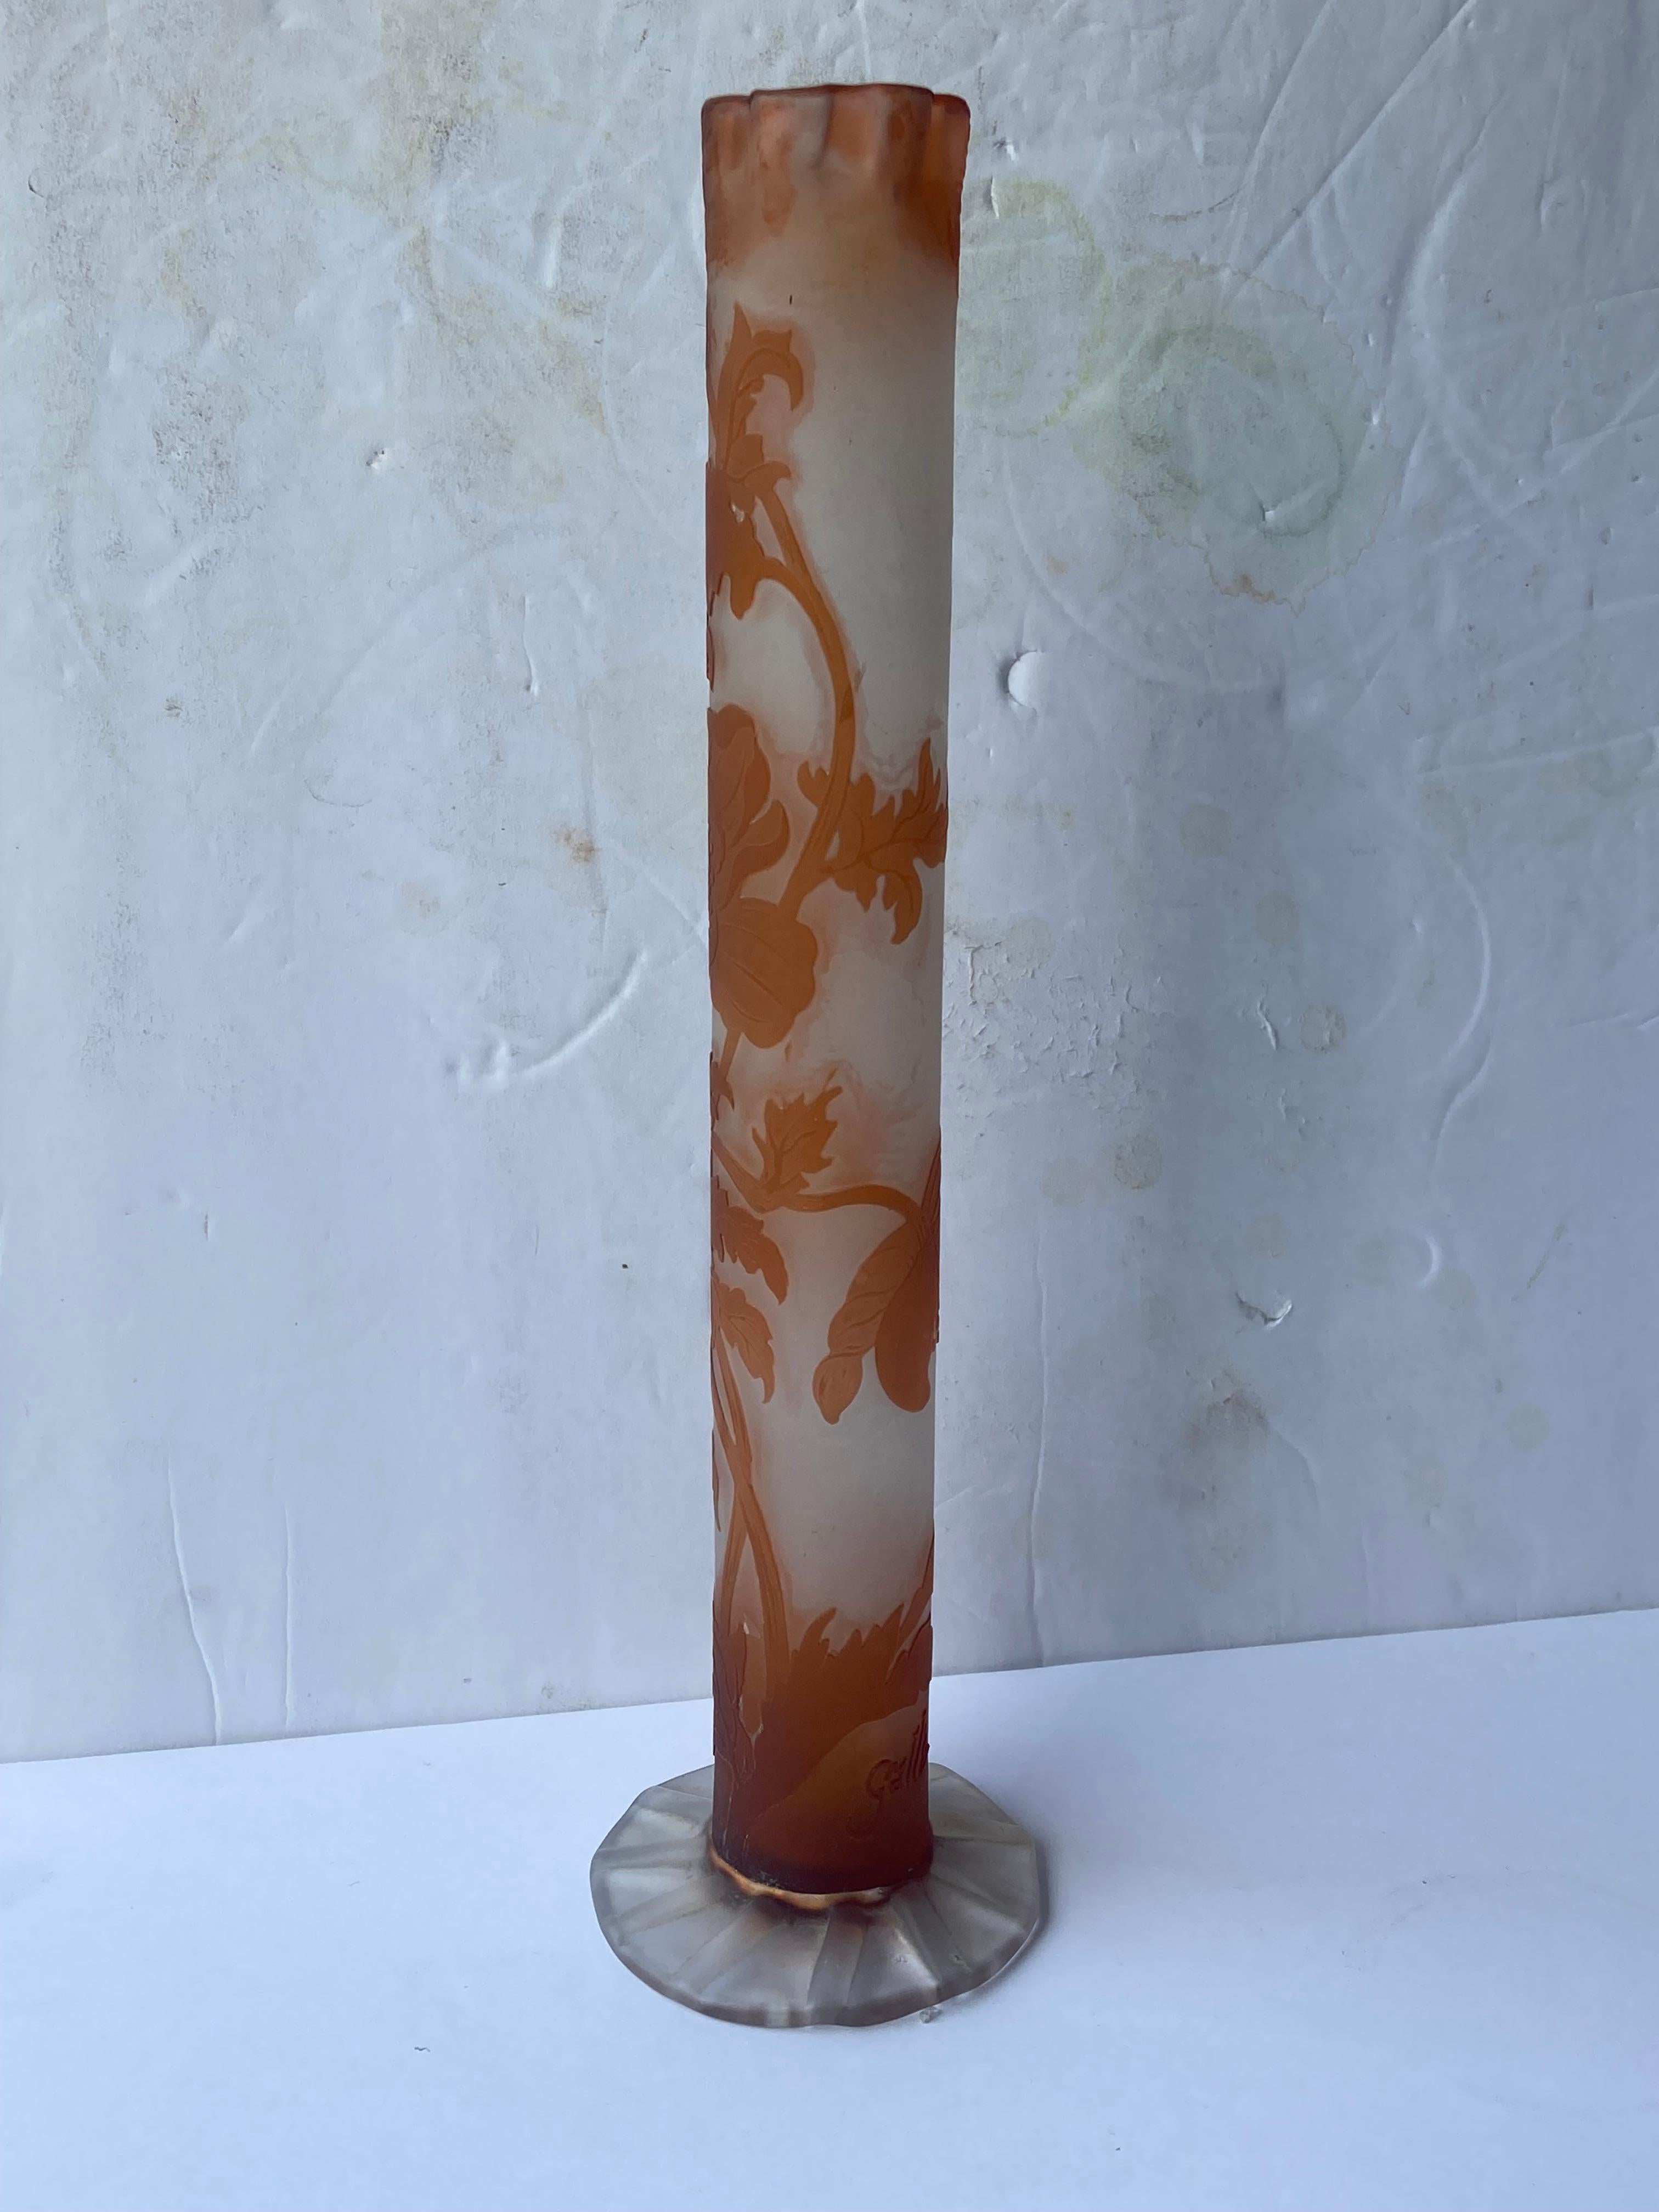 Emile Galle, Rare 'Chrysanthemes vase' c 1900, Etched Glass, Signed In Good Condition For Sale In Los Angeles, CA